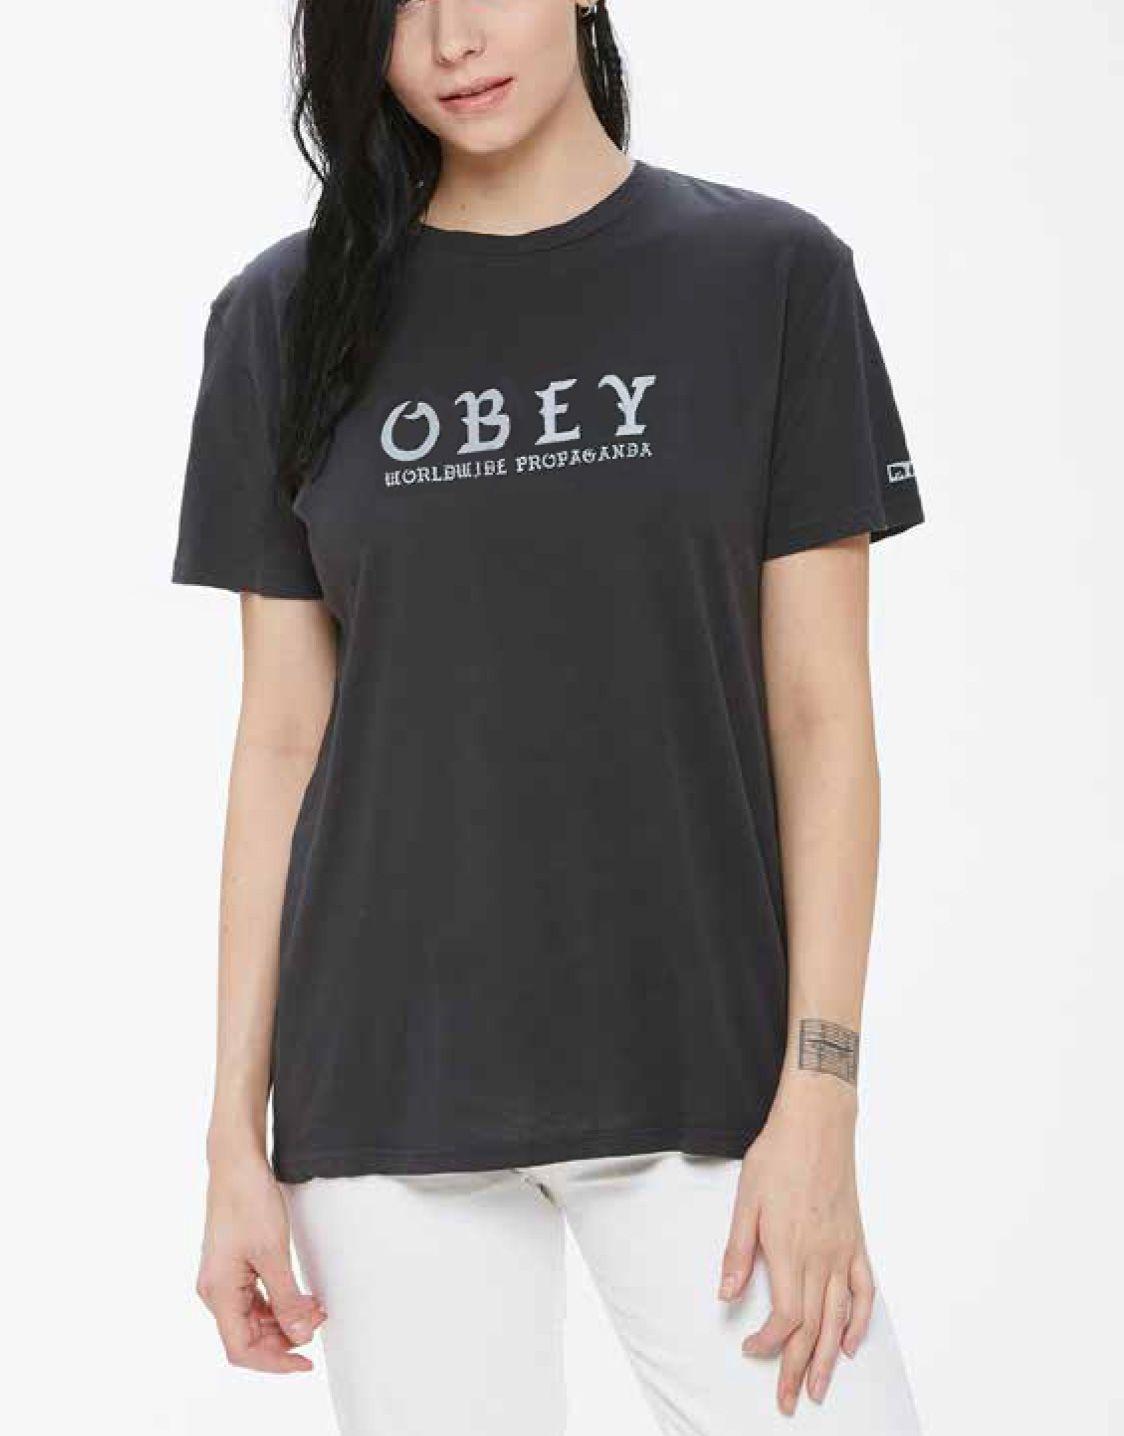 OBEY Clothing Old Logo - OBEY Clothing Old World T Shirt